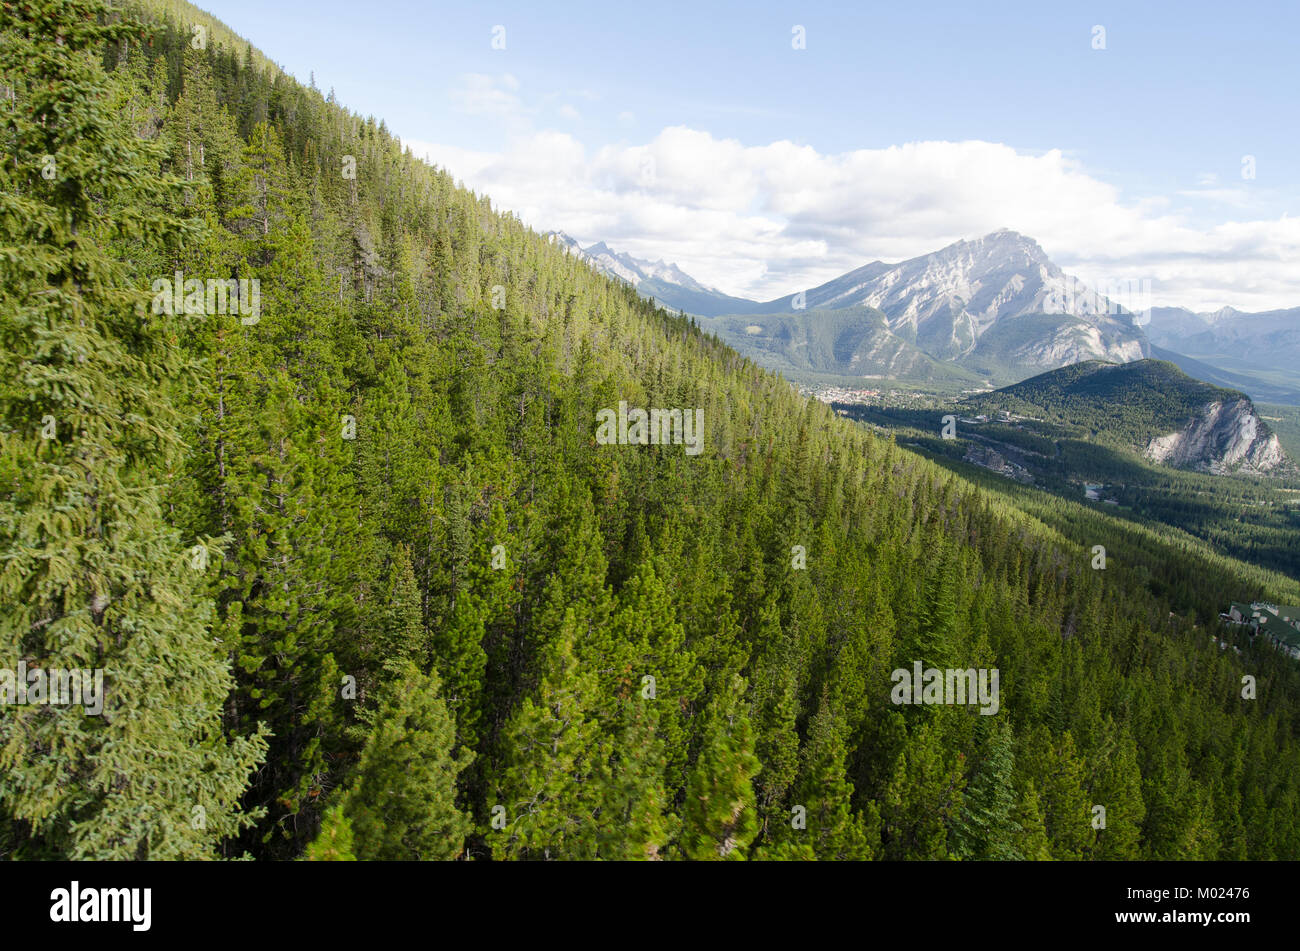 High angle shot above the trees looking at a distant snow capped mountain Stock Photo